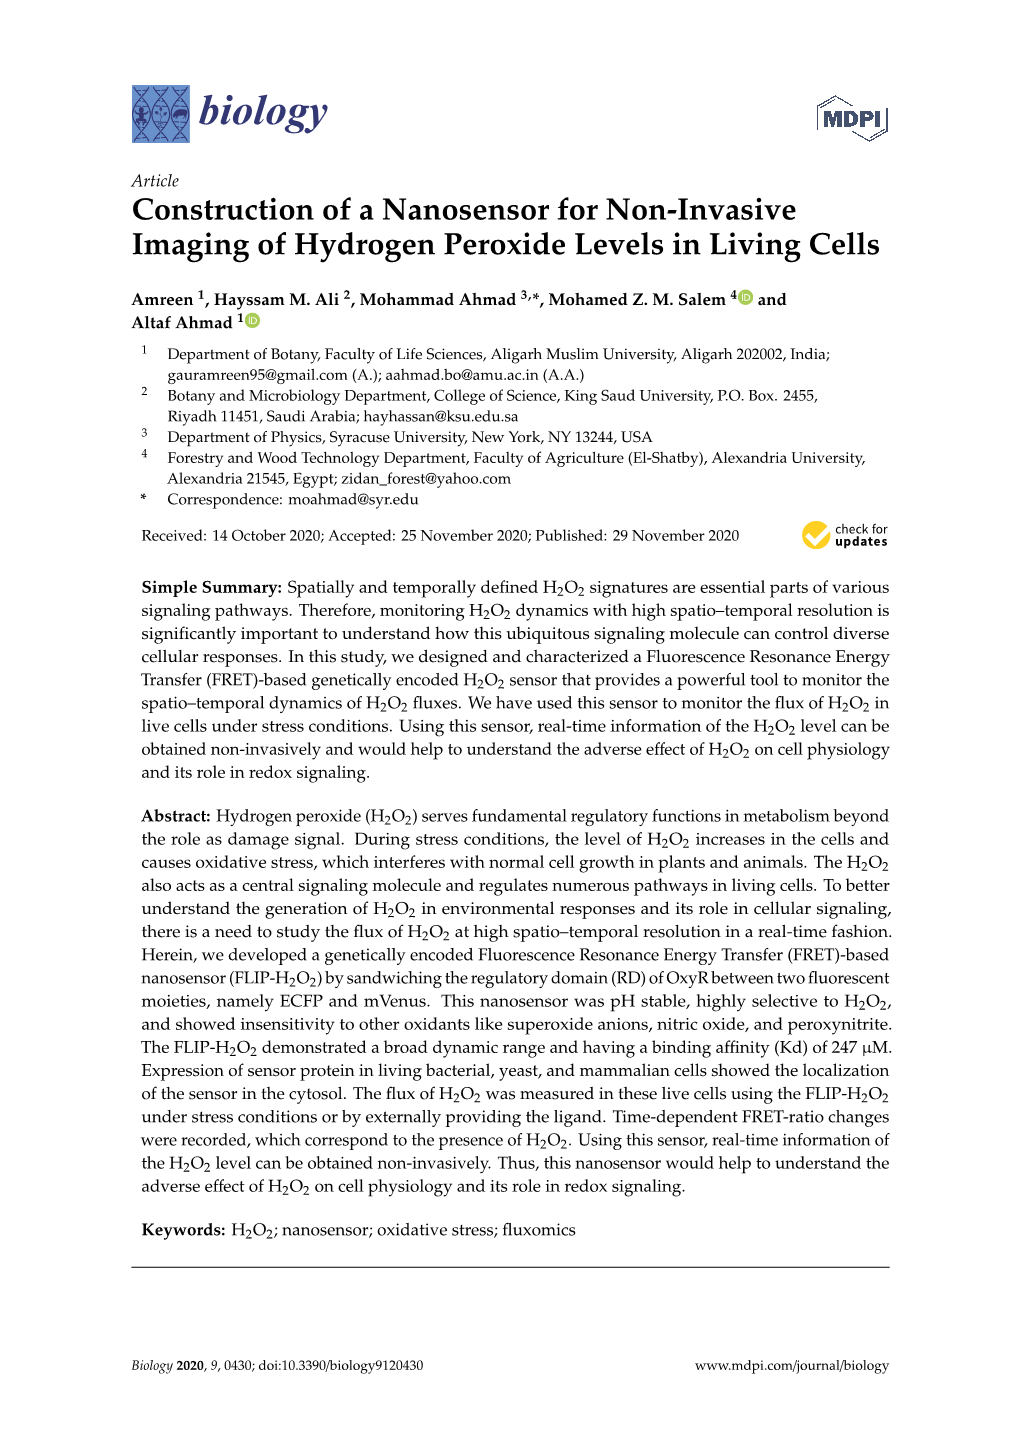 Construction of a Nanosensor for Non-Invasive Imaging of Hydrogen Peroxide Levels in Living Cells